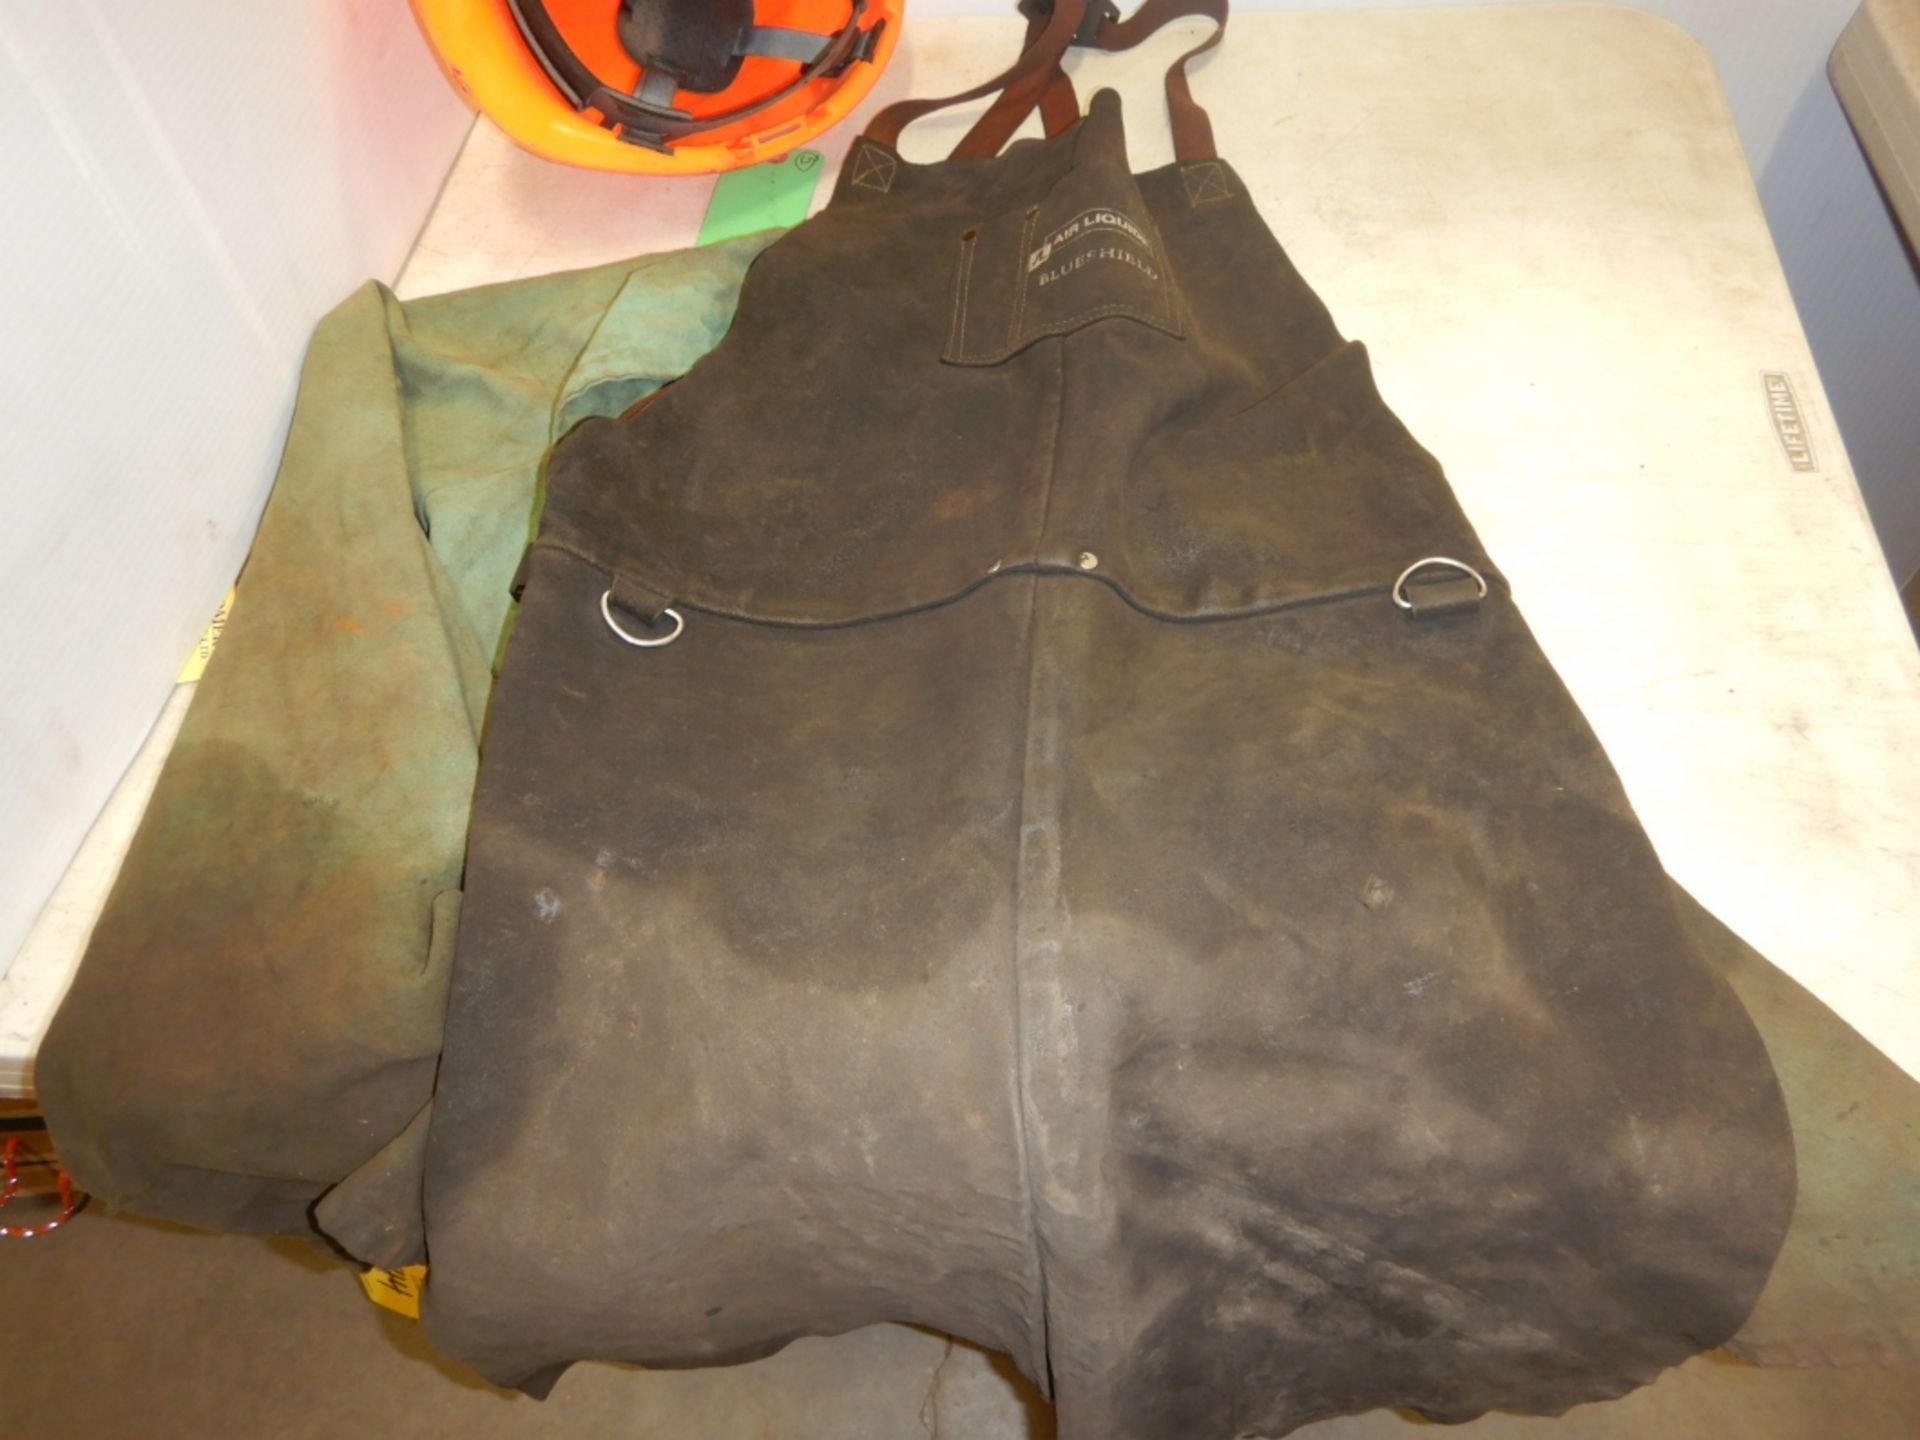 L/O WELDING LEATHERS AND HARD HAT - Image 4 of 4